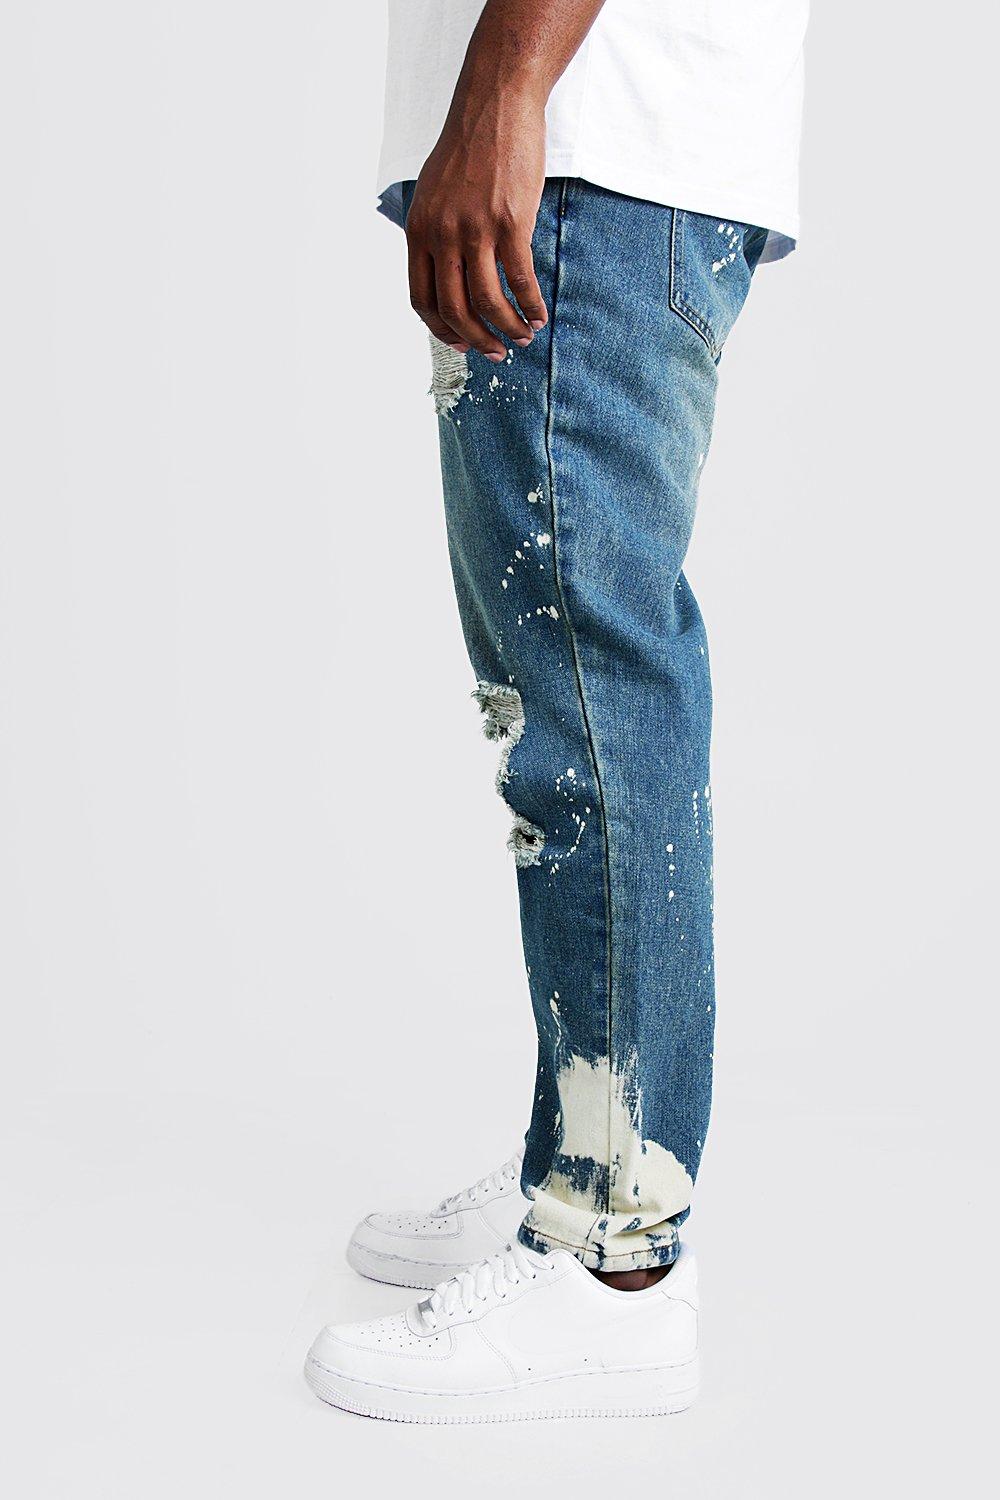 distressed jeans big and tall